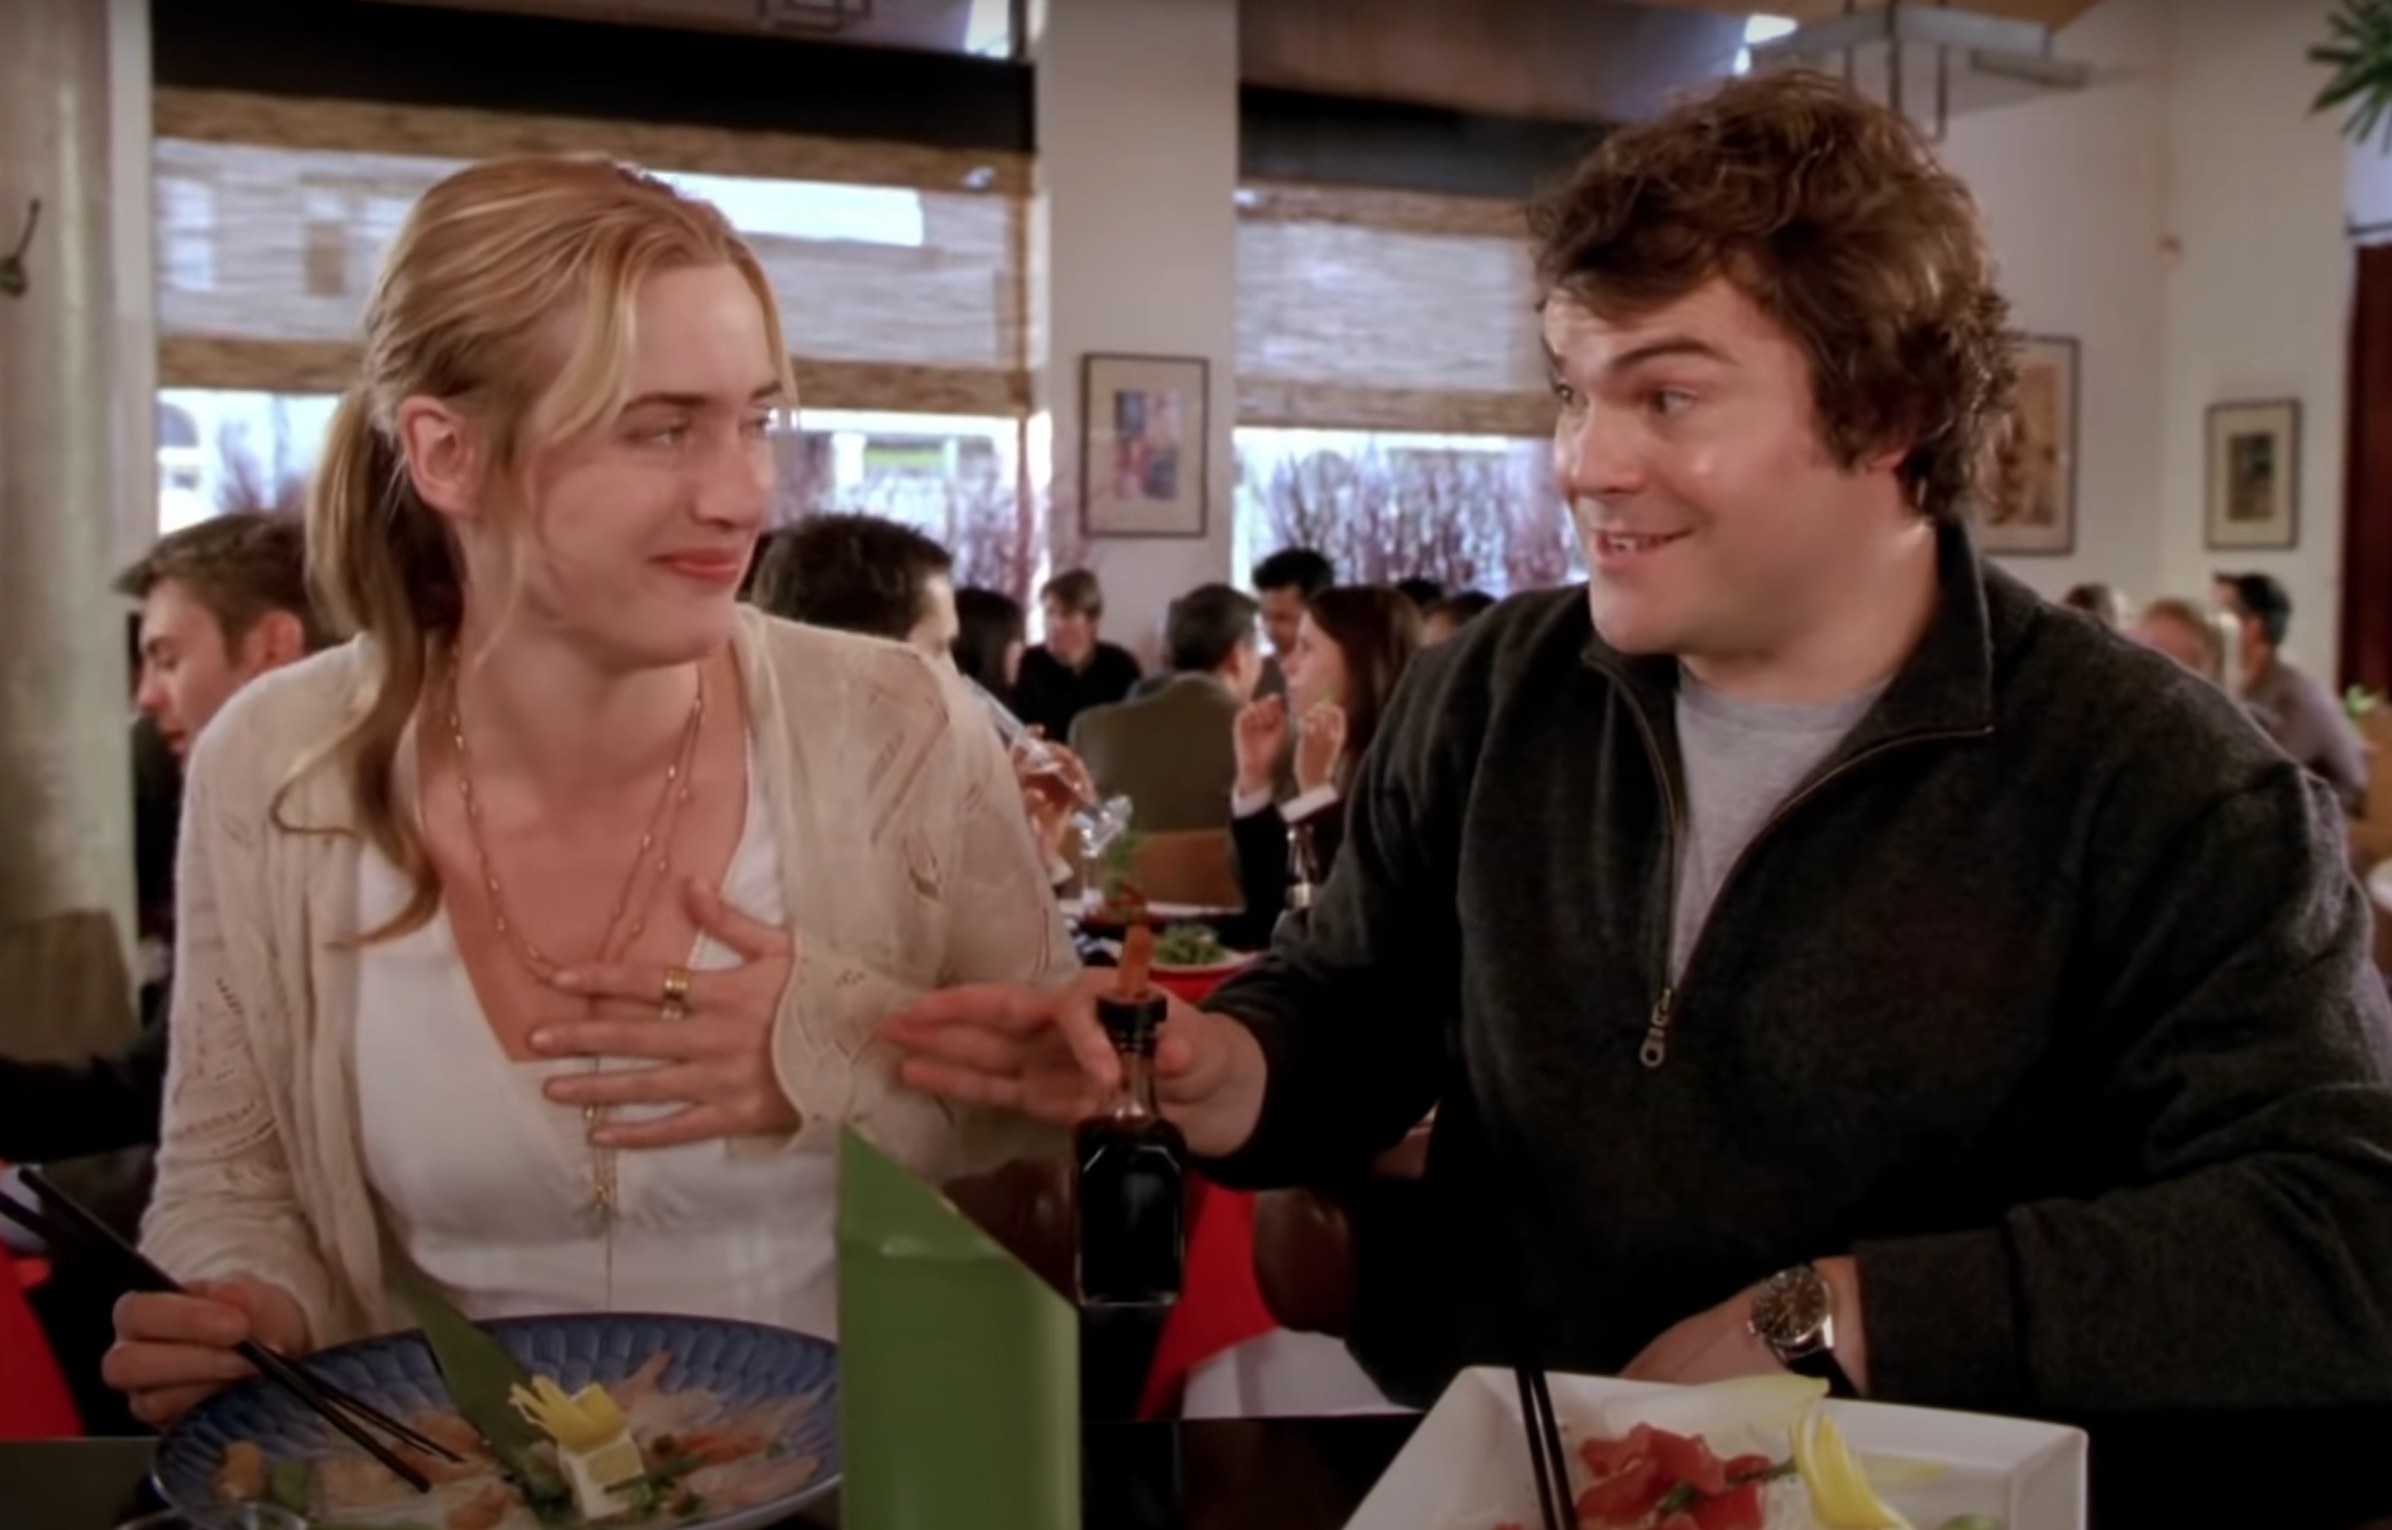 Kate Winslet as Iris and Jack Black as Miles chat during a meal